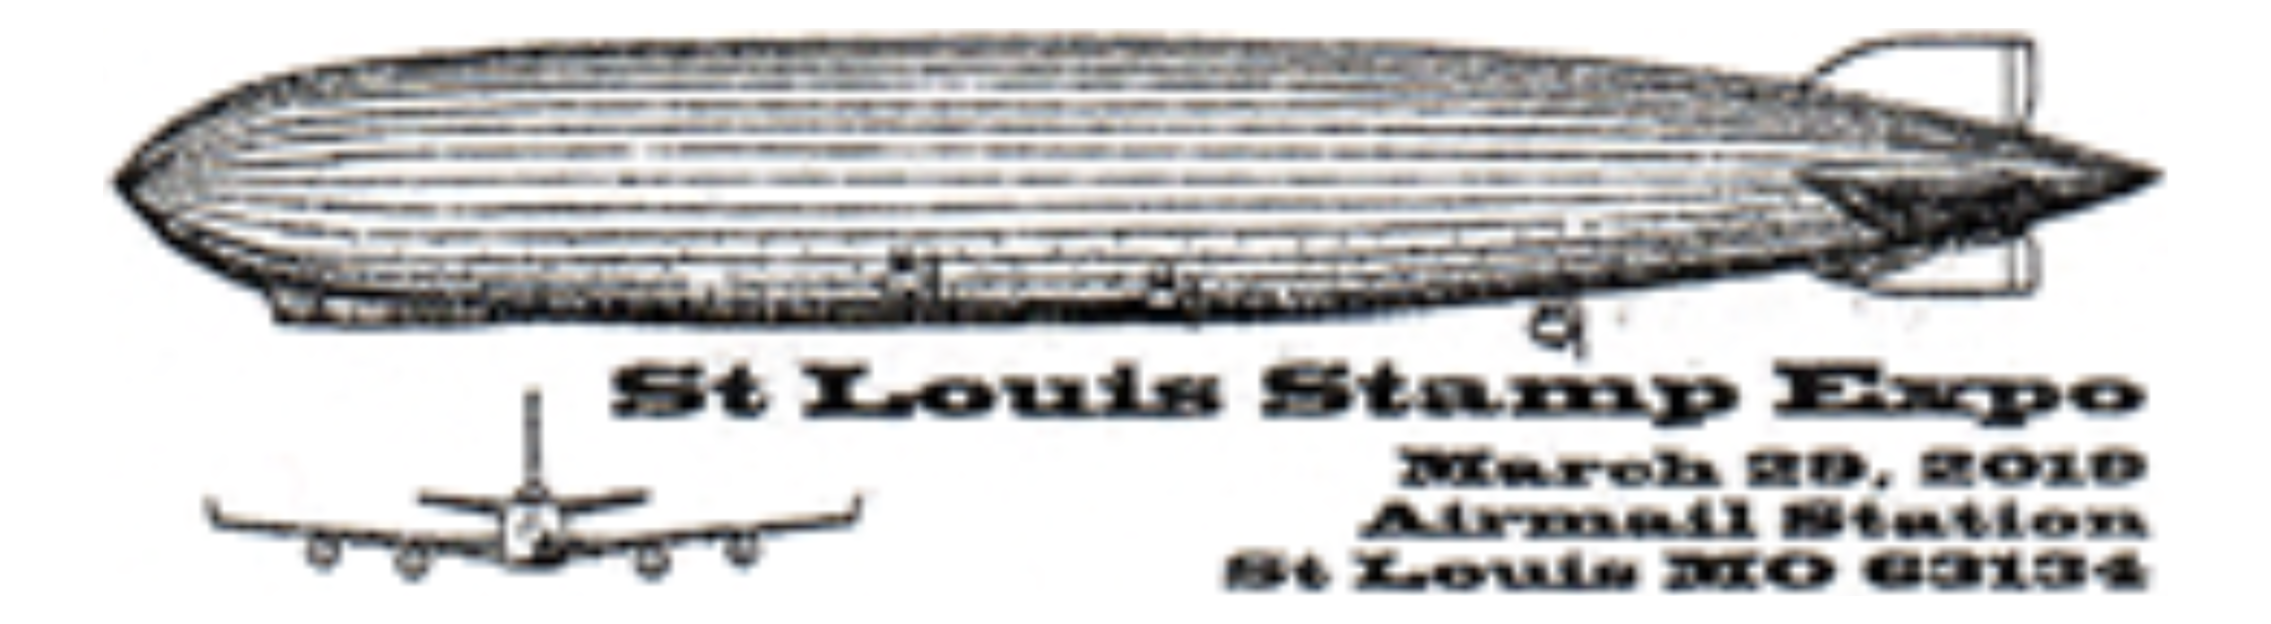 St. Louis Stamp Expo Airmail Station, St. Louis, Missouri — 2019-03-29 – 2019-03-31 ...